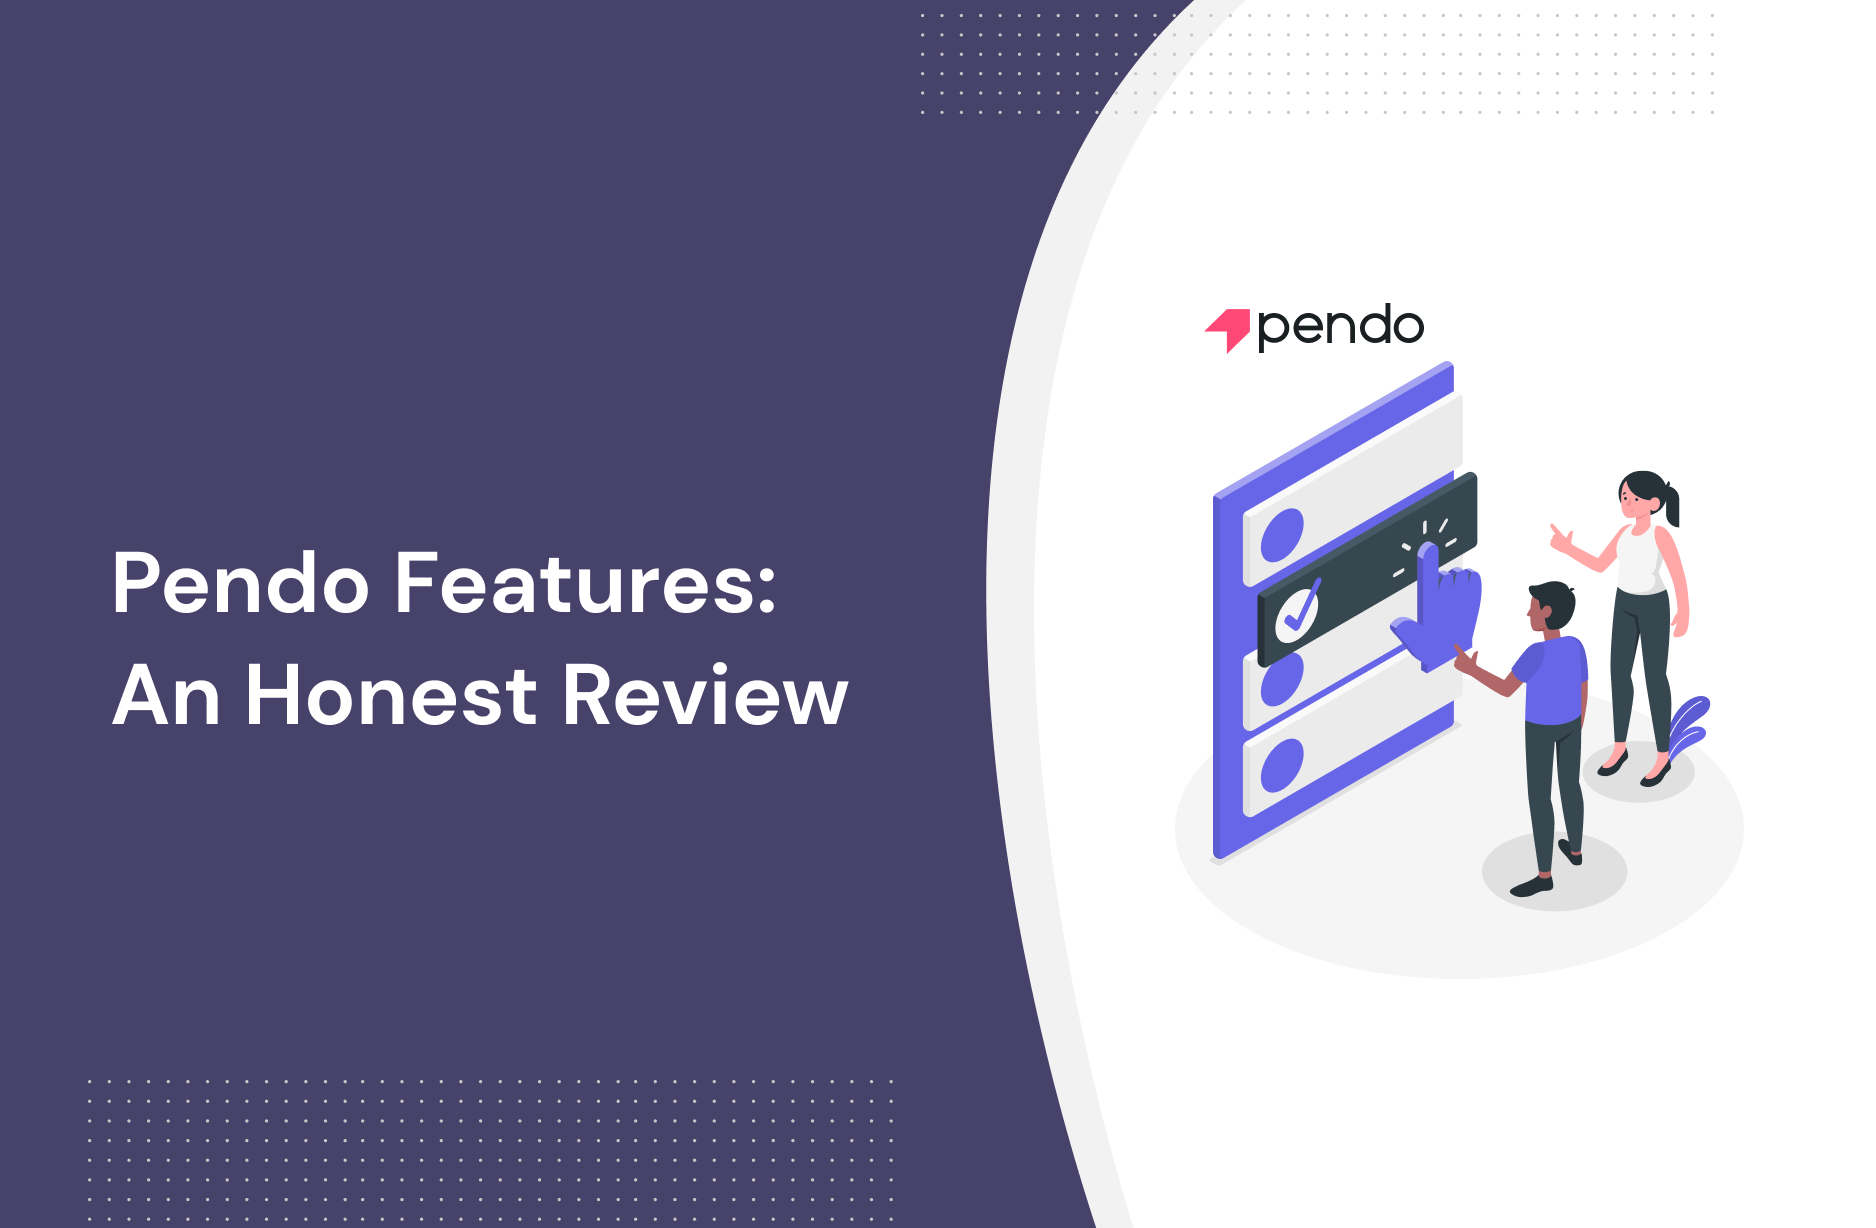 Pendo Features: An Honest Review